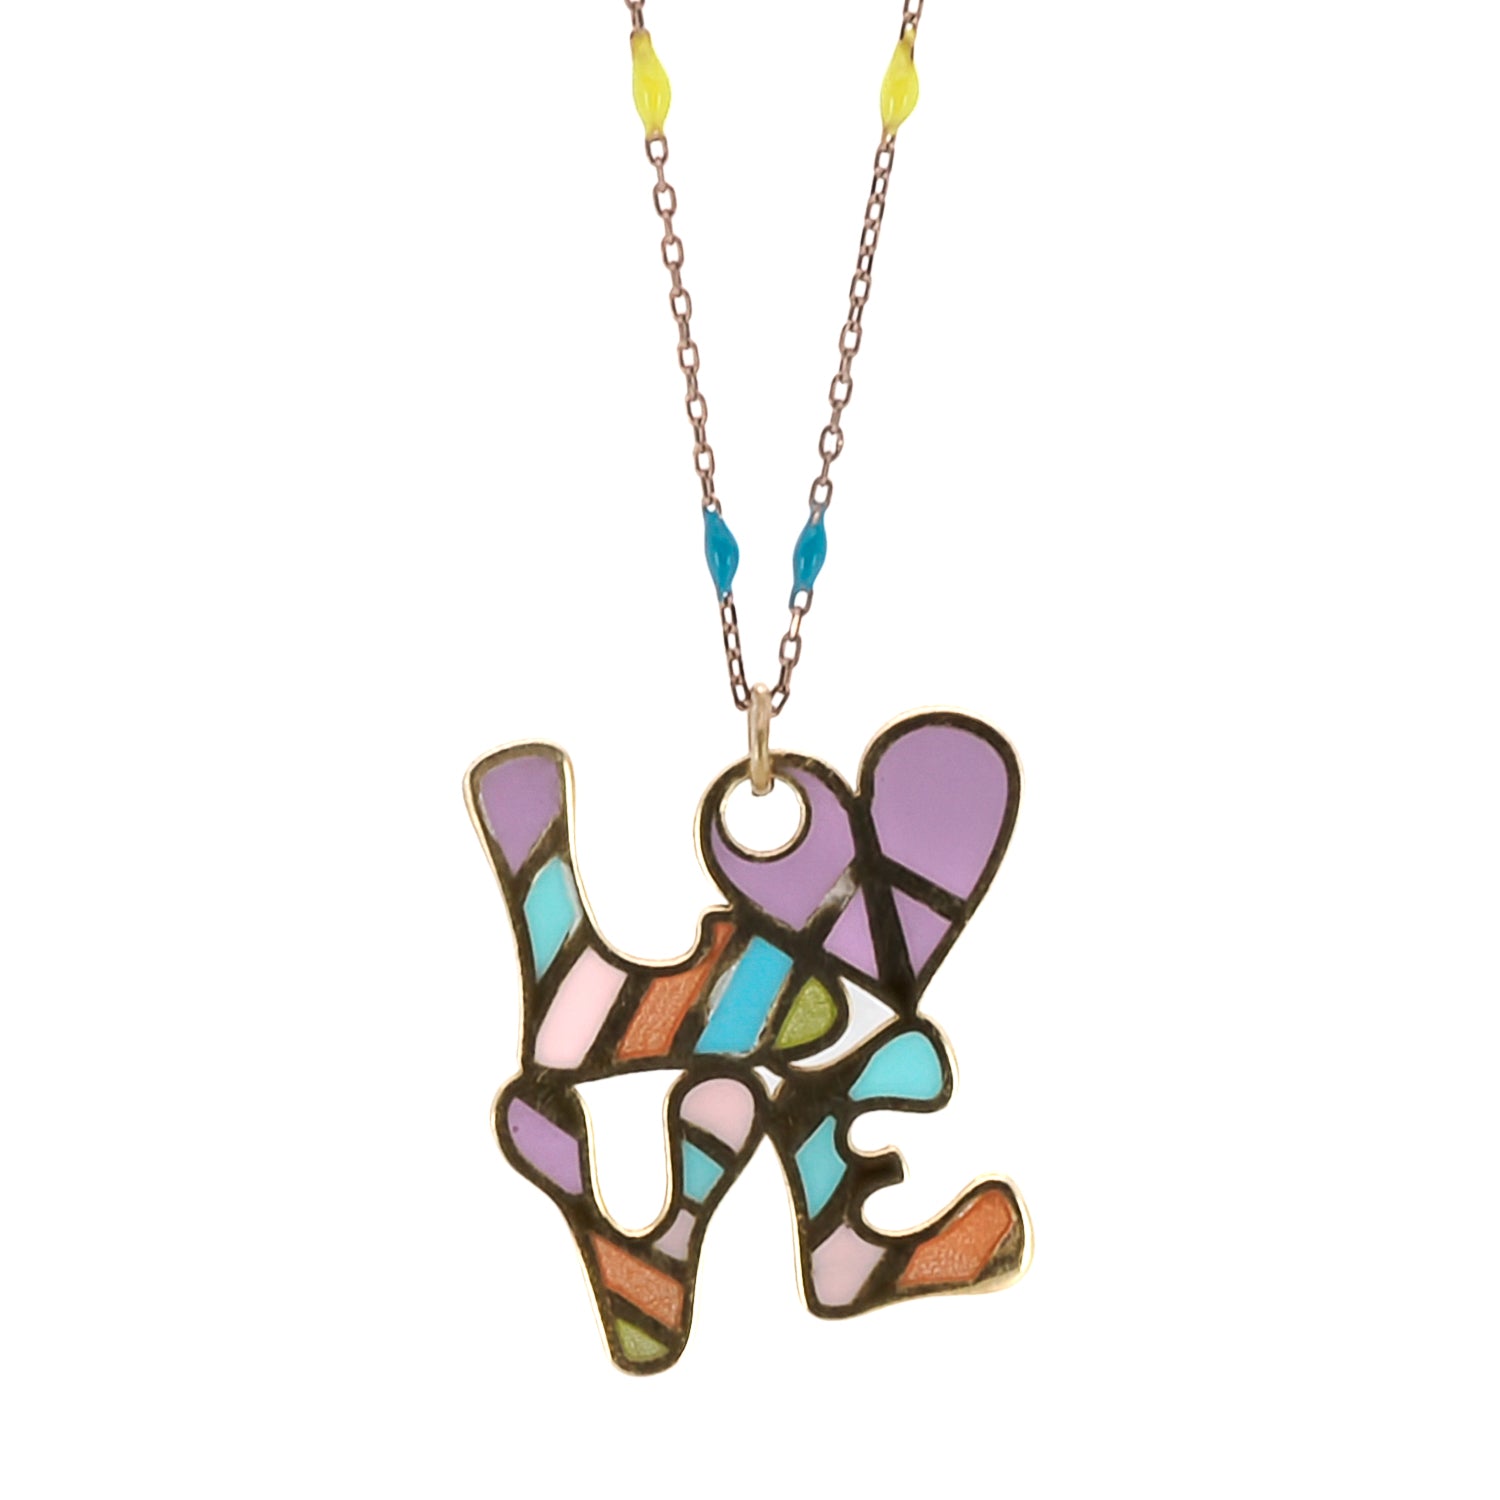 Handcrafted with care, the Color of Love Necklace showcases a beautiful &quot;Love&quot; pendant made of sterling silver and 18K gold plating. The colorful enamel accents make this necklace a sentimental and meaningful gift for your loved ones.